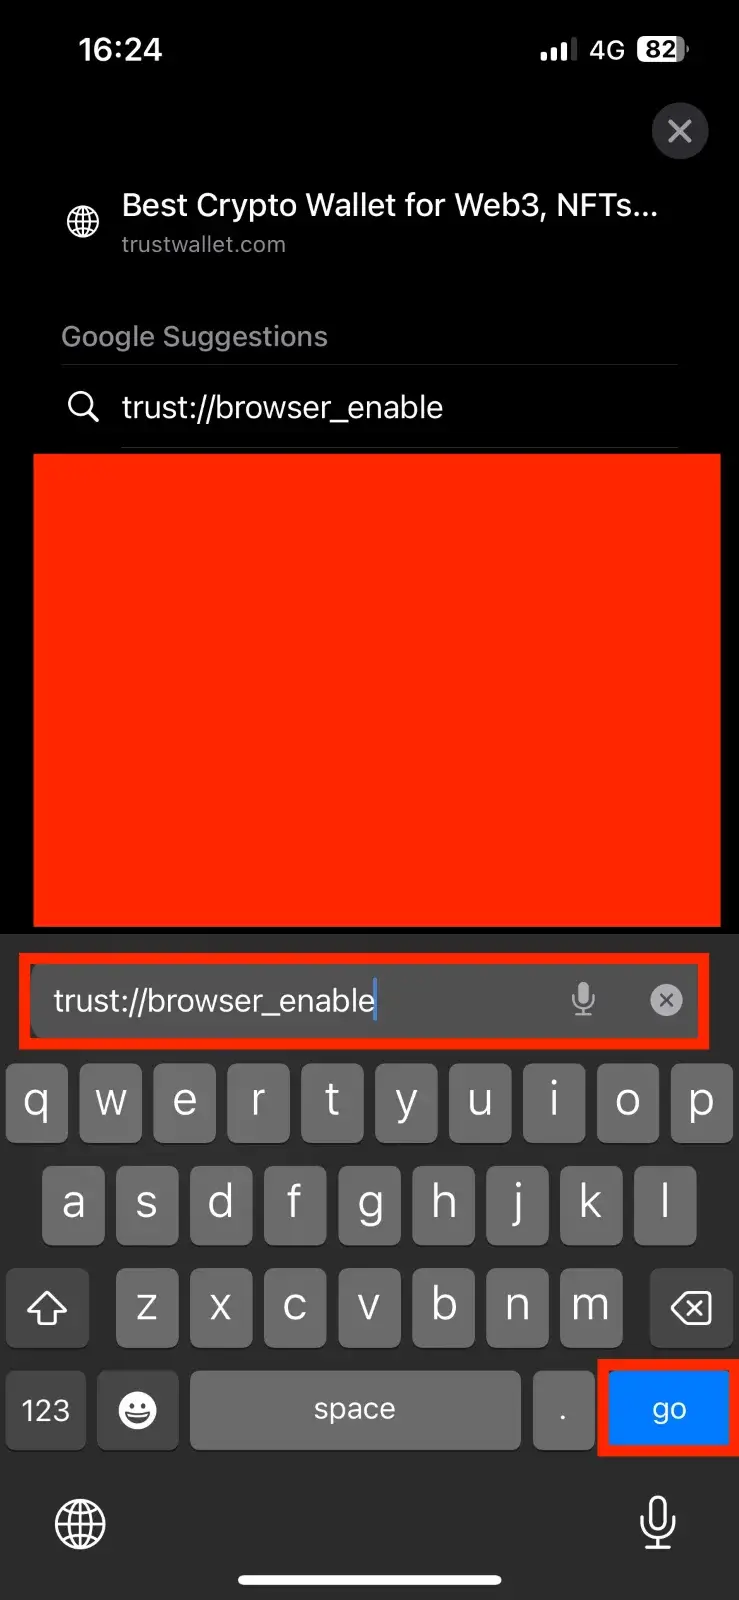 Step 1. Open Your Mobile Browser and Insert “trust://browser_enable”